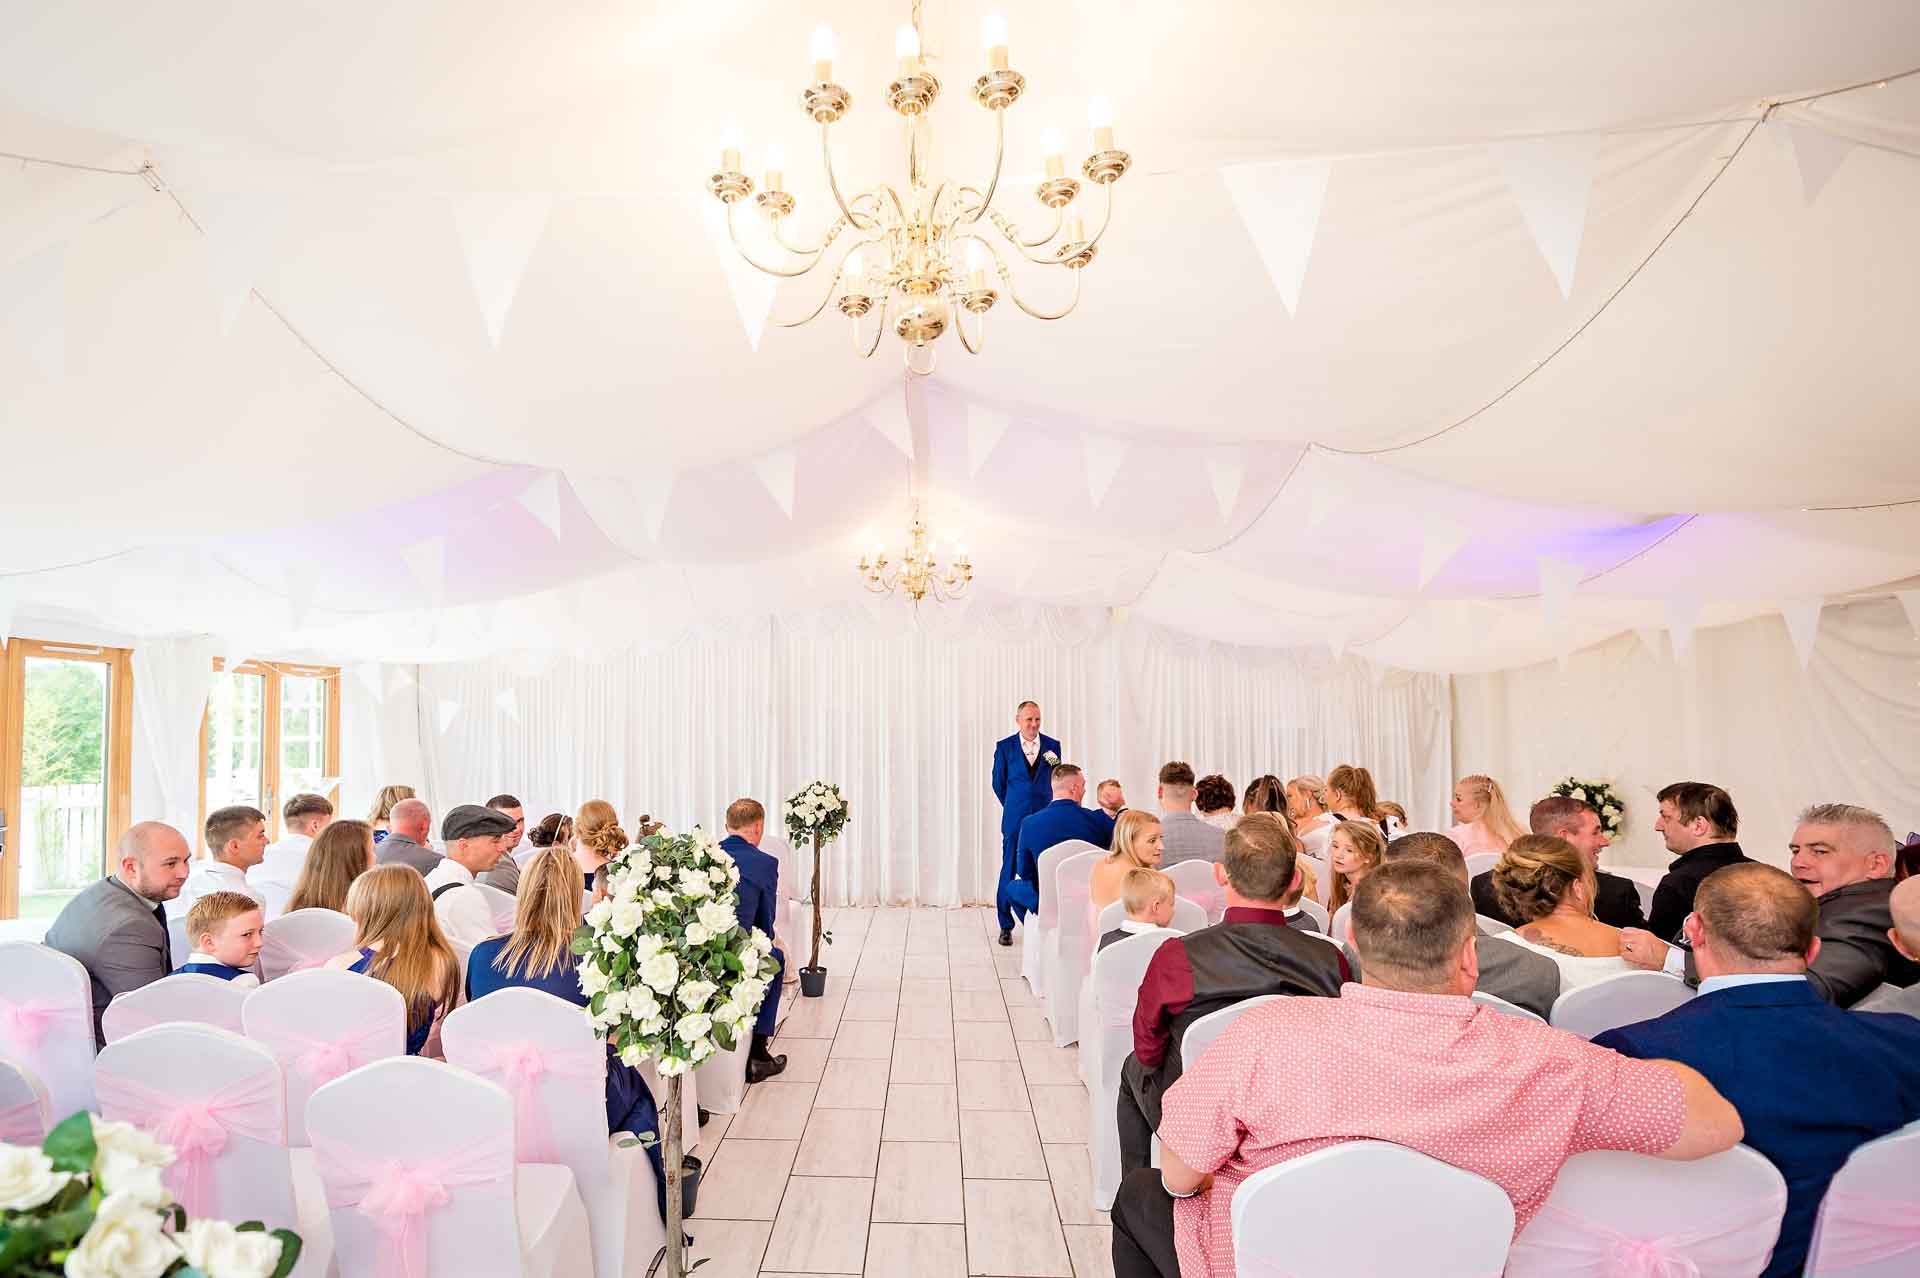 The Marquee at Ridgeway Golf Club with groom waiting at the front for his bride